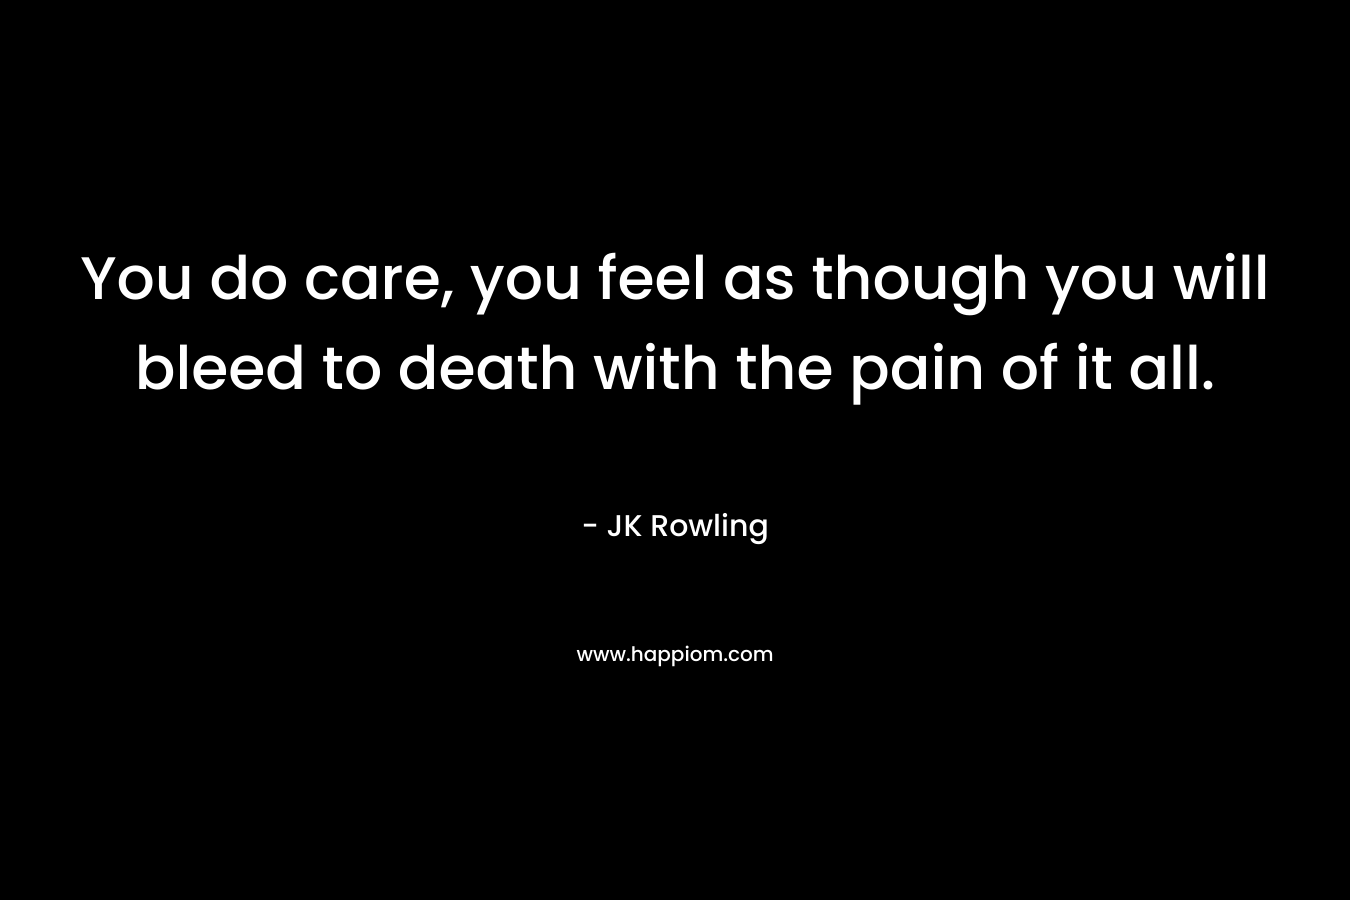 You do care, you feel as though you will bleed to death with the pain of it all.